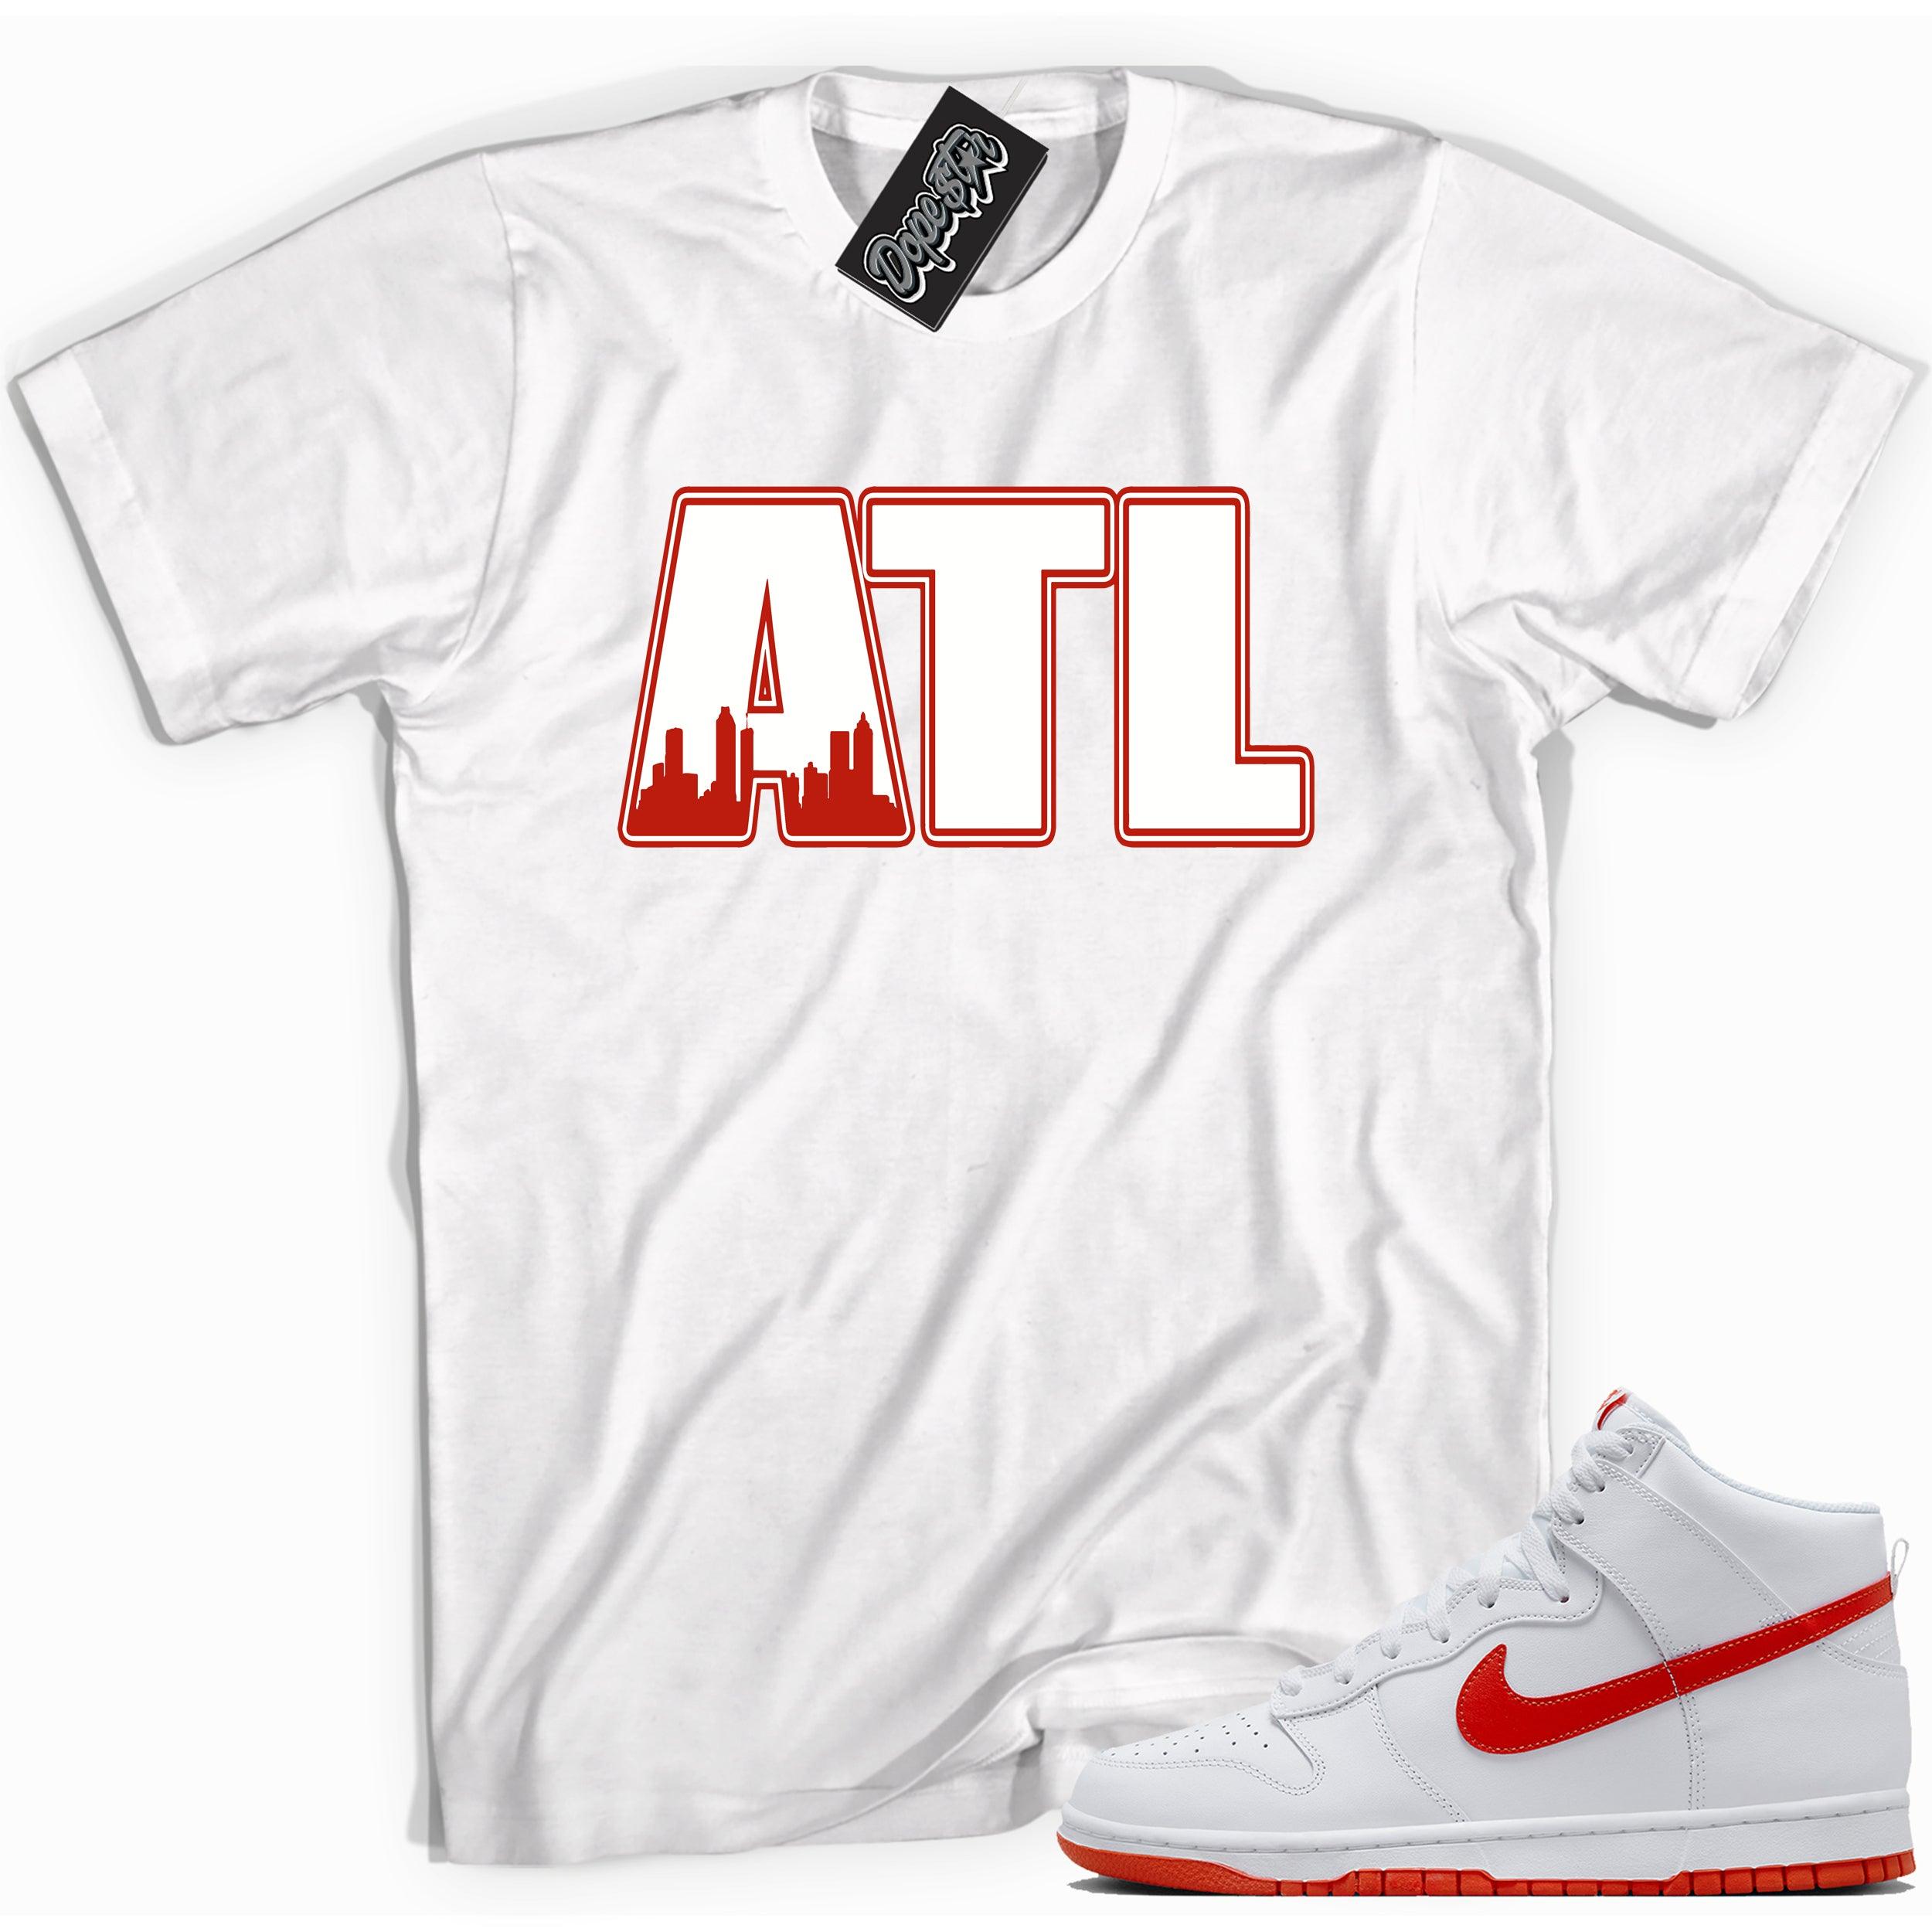 Cool white graphic tee with 'atl atlanta' print, that perfectly matches Nike Dunk High White Picante Red sneakers.